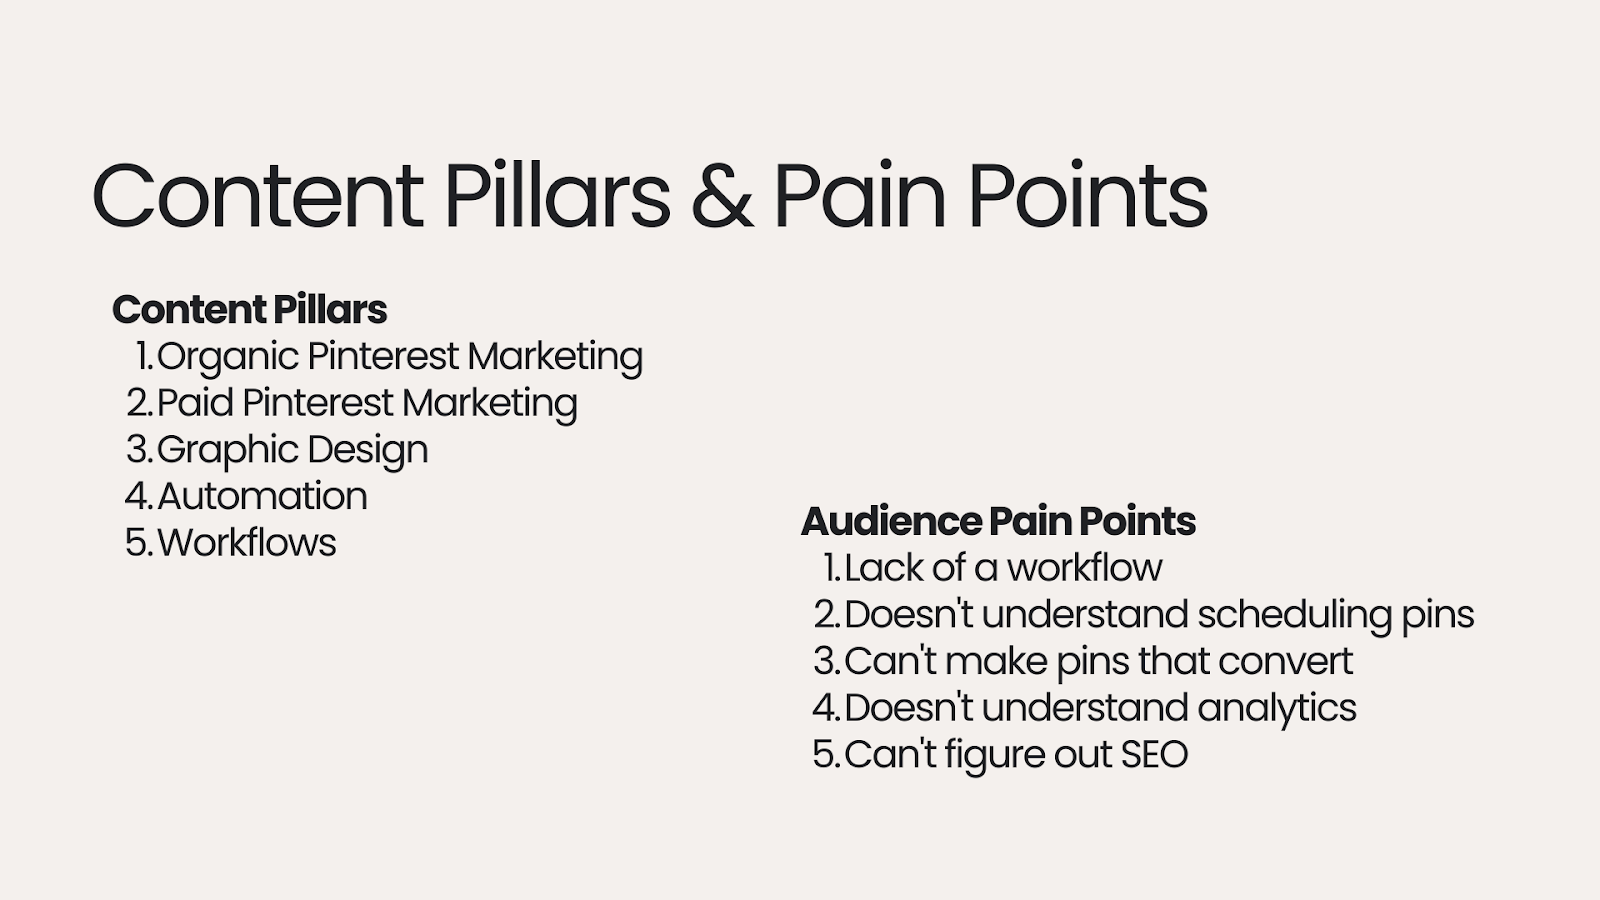 content pillars and pain points in your content strategy for digital products